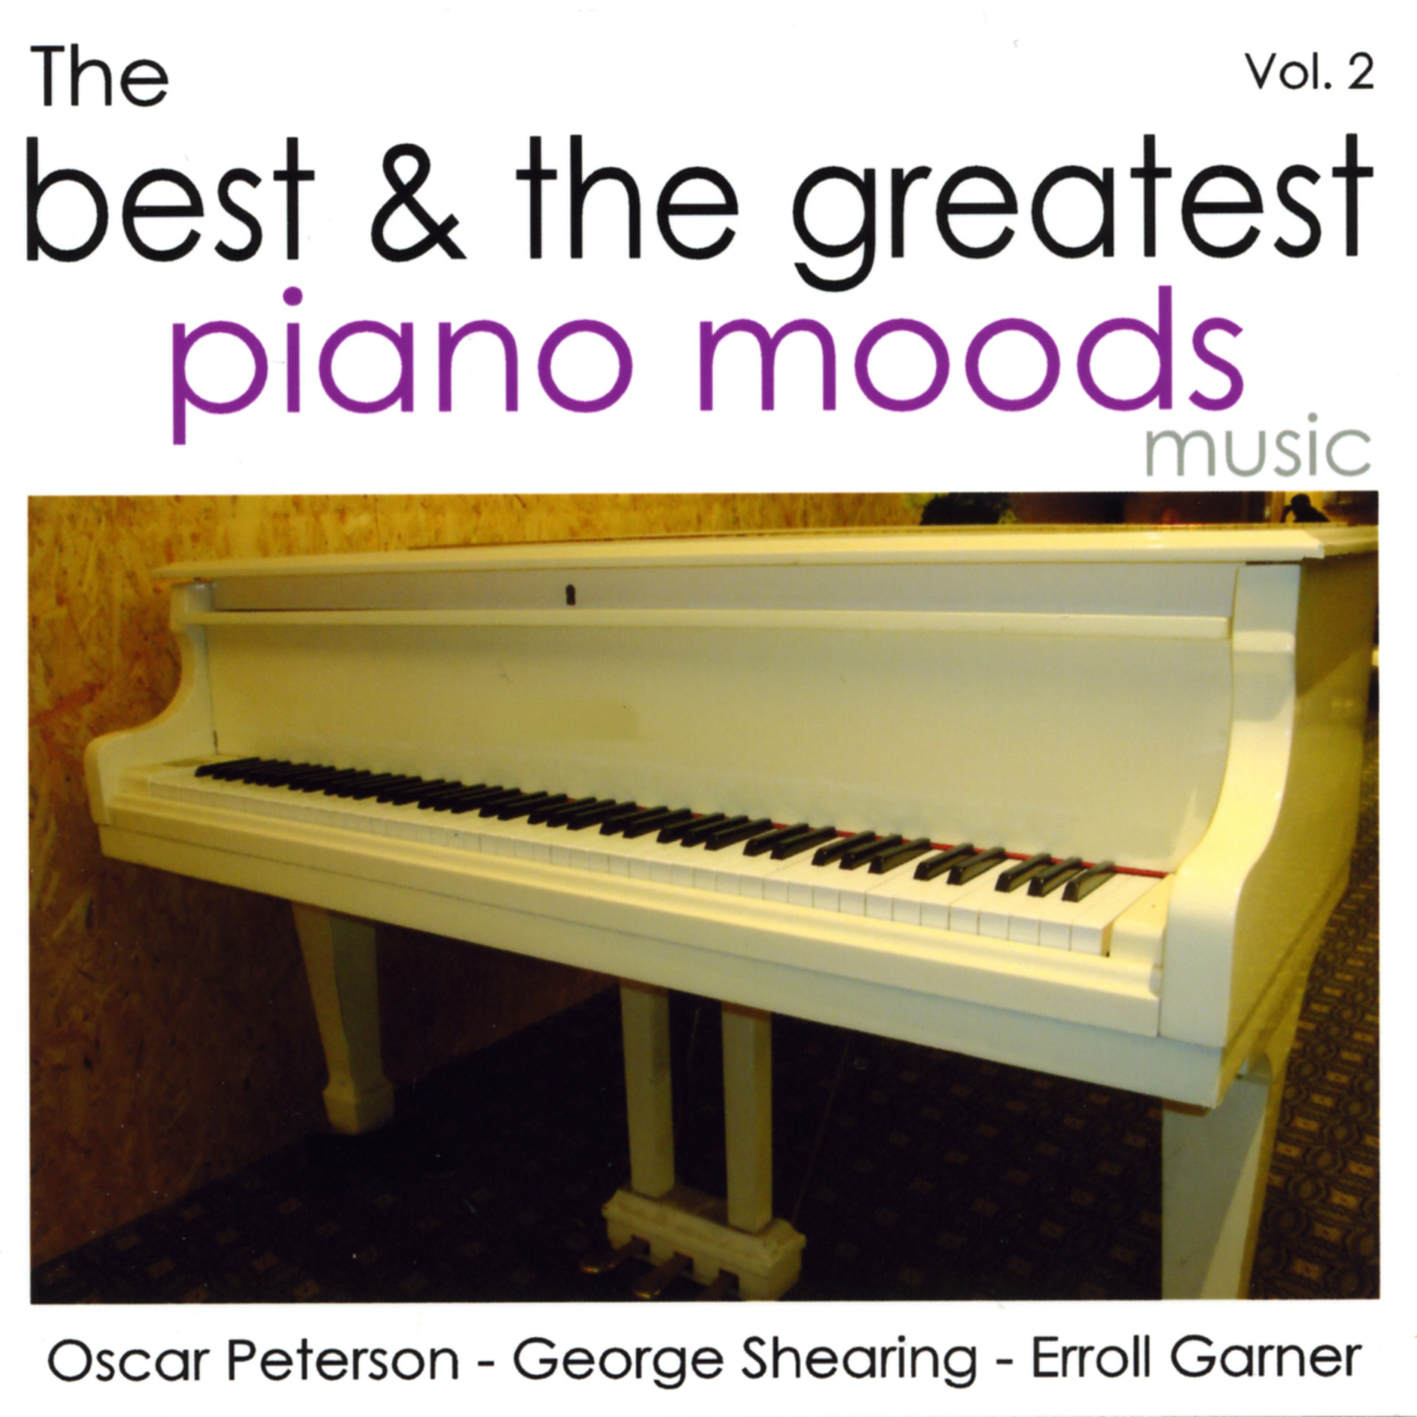 The Best & The Greatest Piano Moods - Vol.2